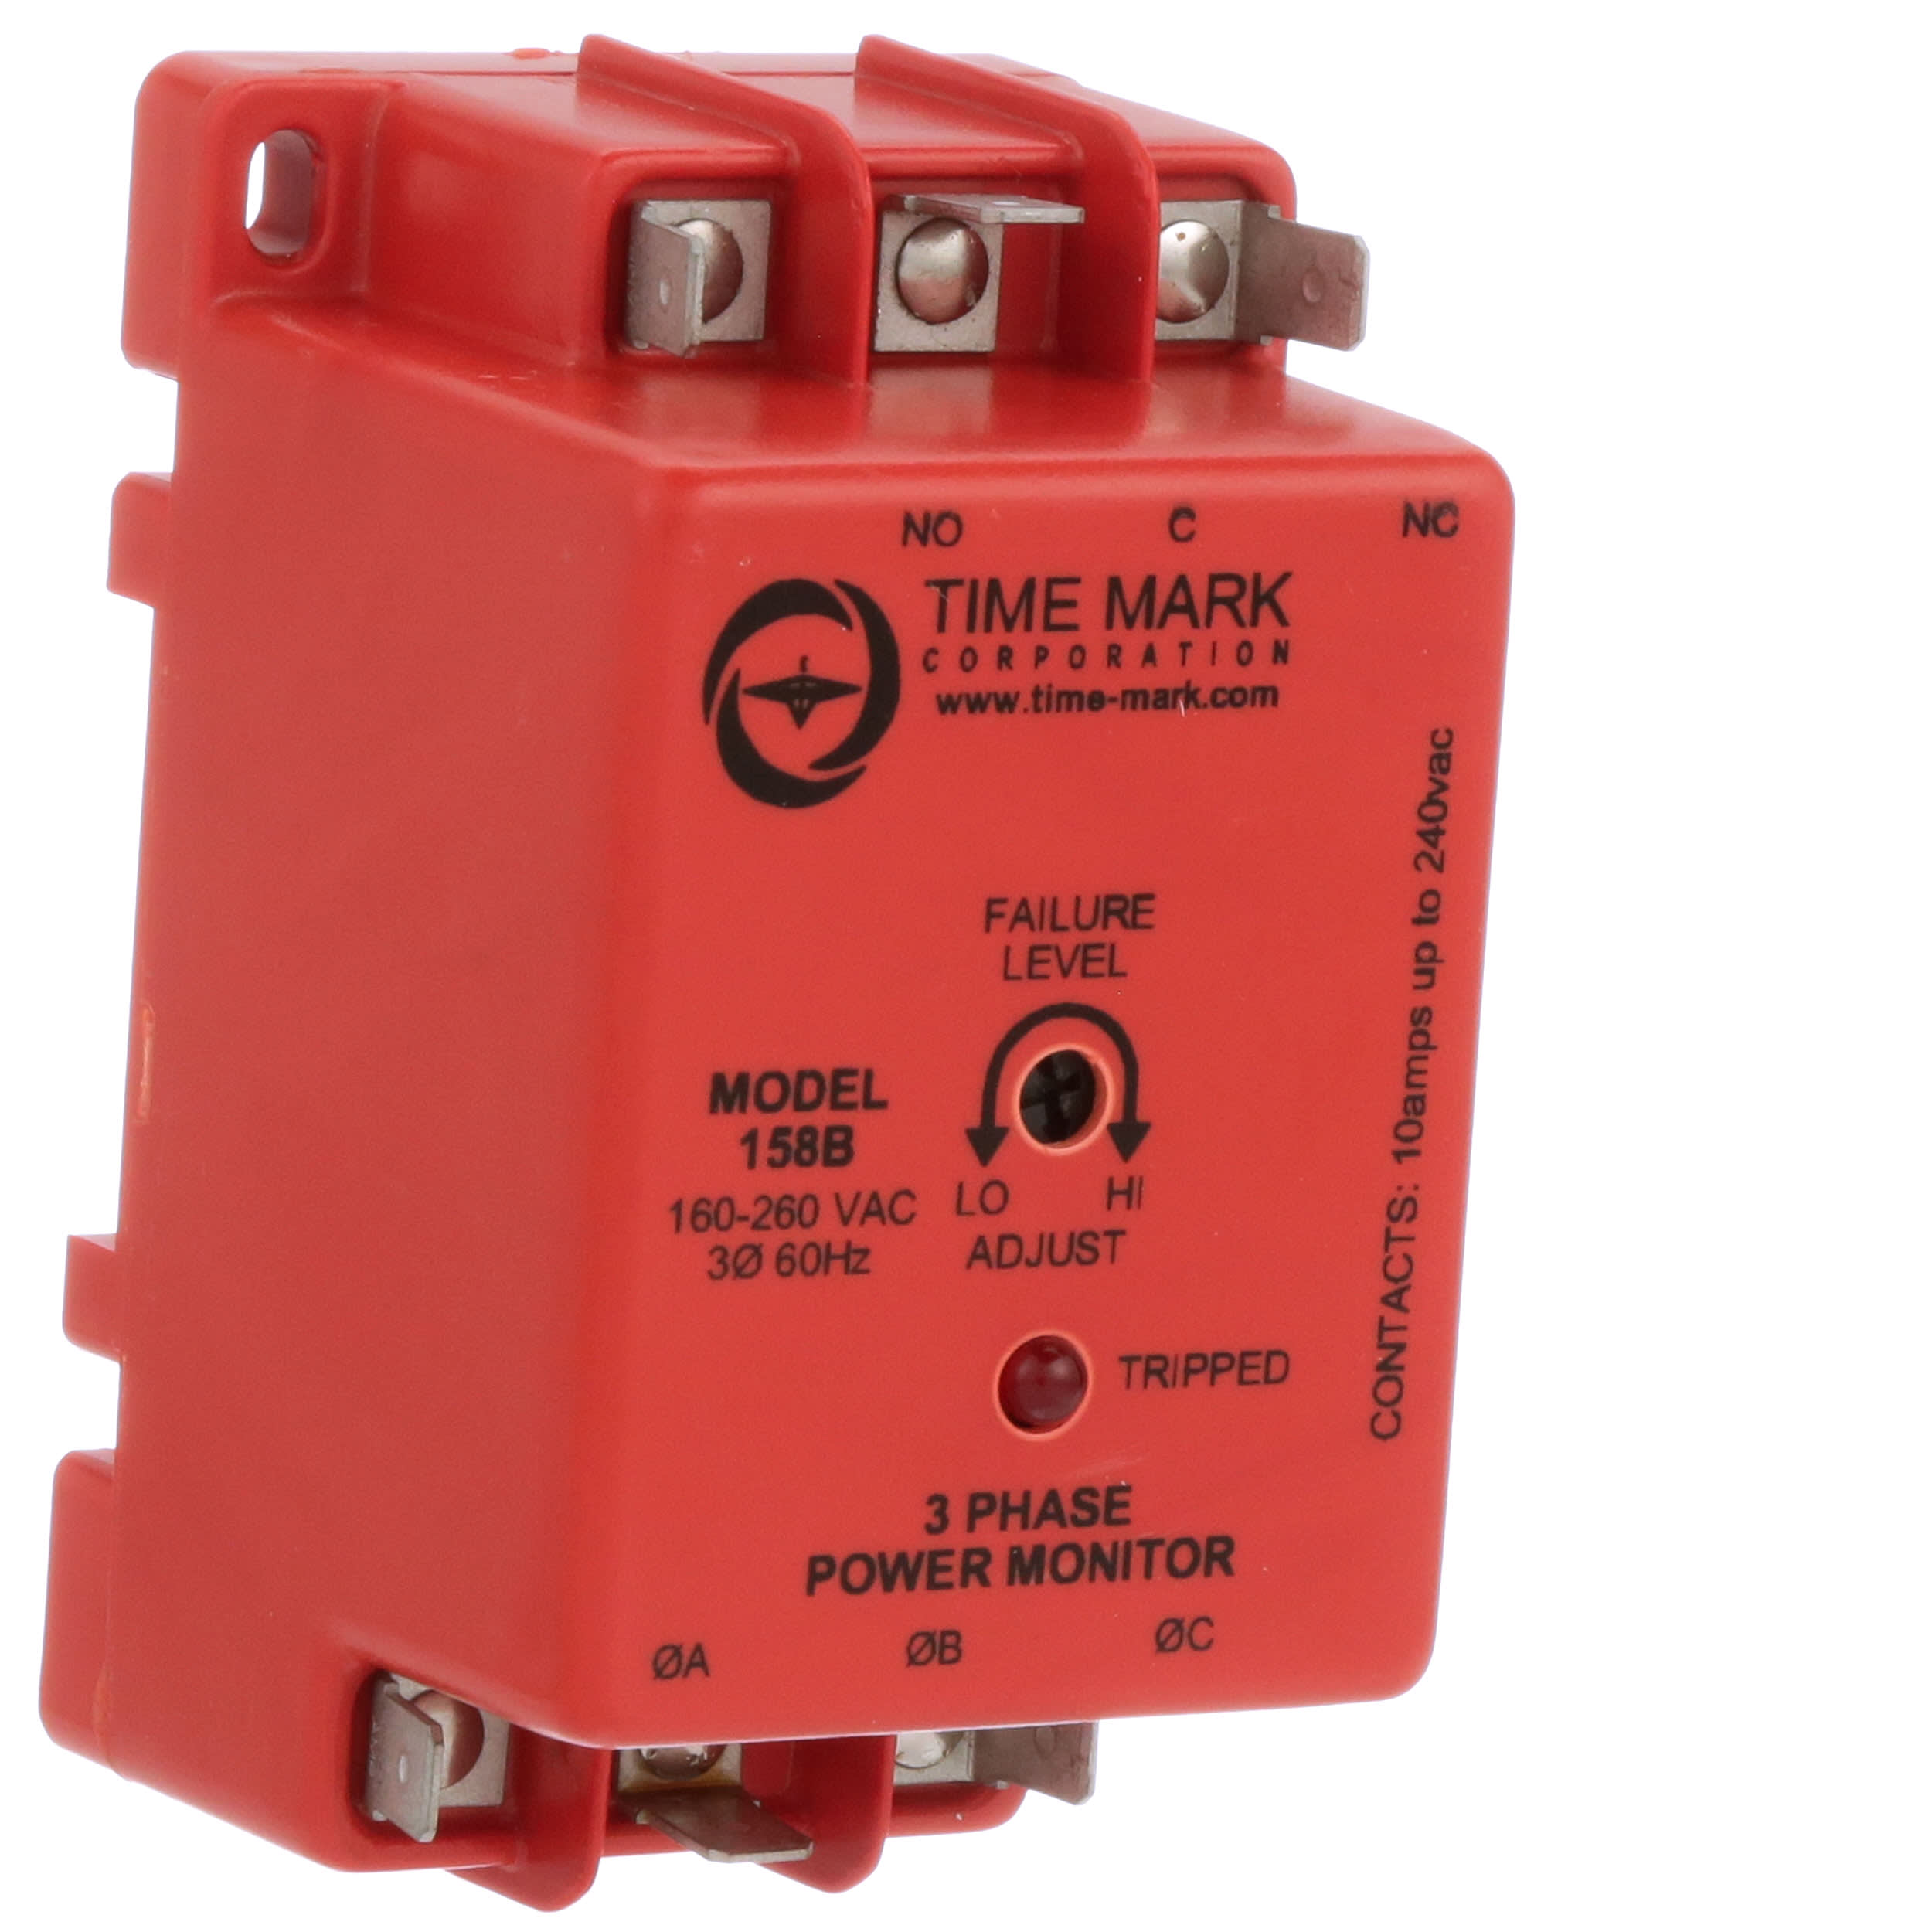 Details about   TIME MARK 158B-240VAC 3 PHASE POWER MONITOR 